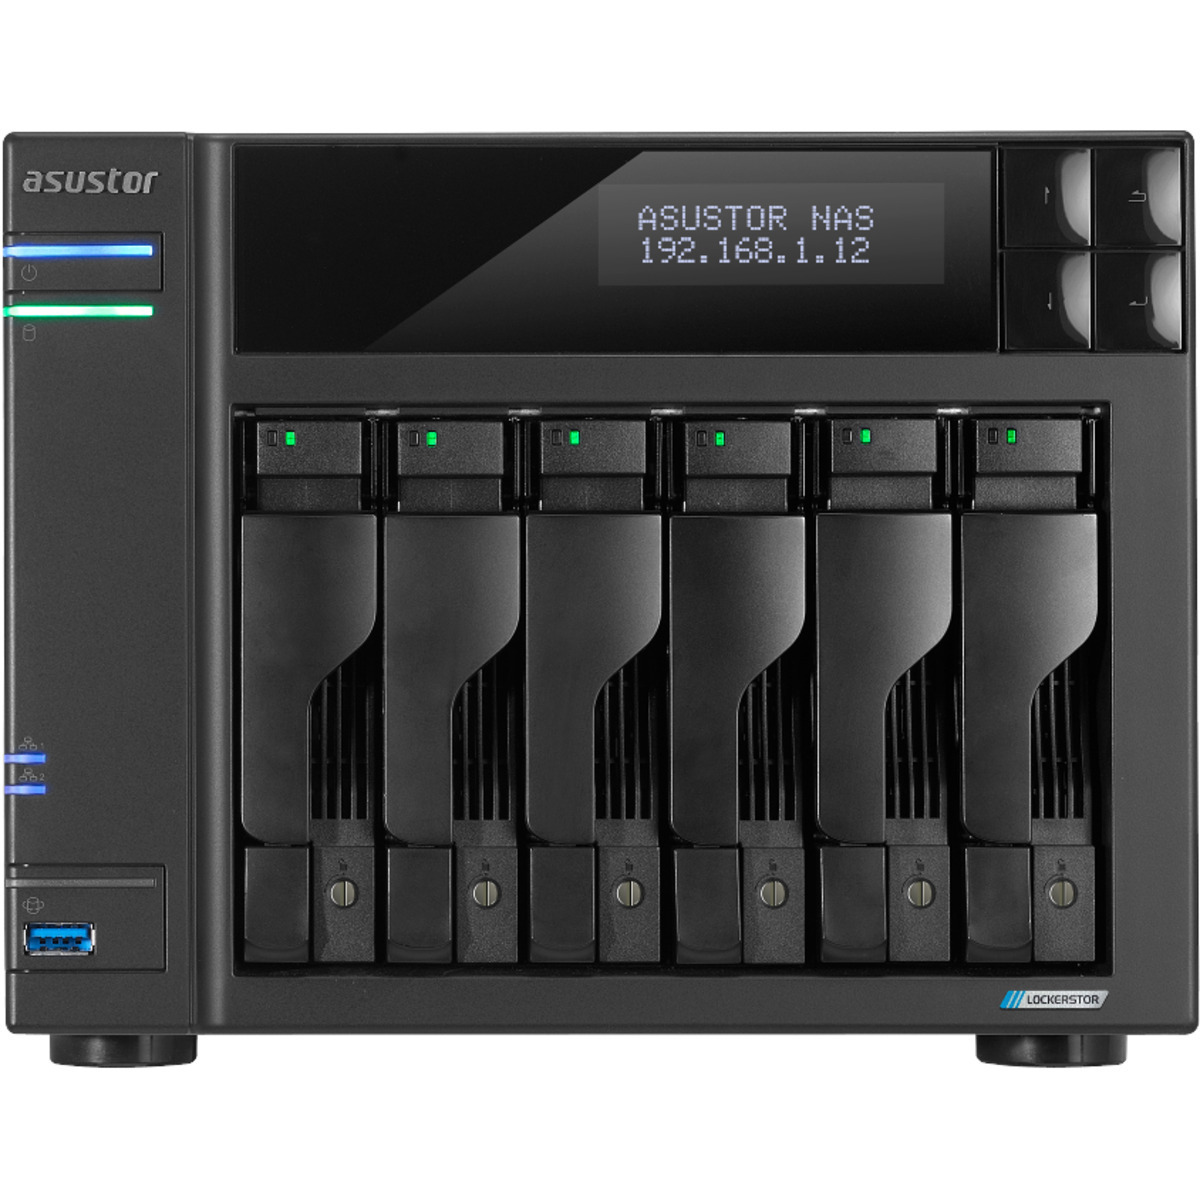 ASUSTOR LOCKERSTOR 6 Gen2 AS6706T 36tb 6-Bay Desktop Multimedia / Power User / Business NAS - Network Attached Storage Device 3x12tb Seagate EXOS X18 ST12000NM000J 3.5 7200rpm SATA 6Gb/s HDD ENTERPRISE Class Drives Installed - Burn-In Tested - FREE RAM UPGRADE LOCKERSTOR 6 Gen2 AS6706T